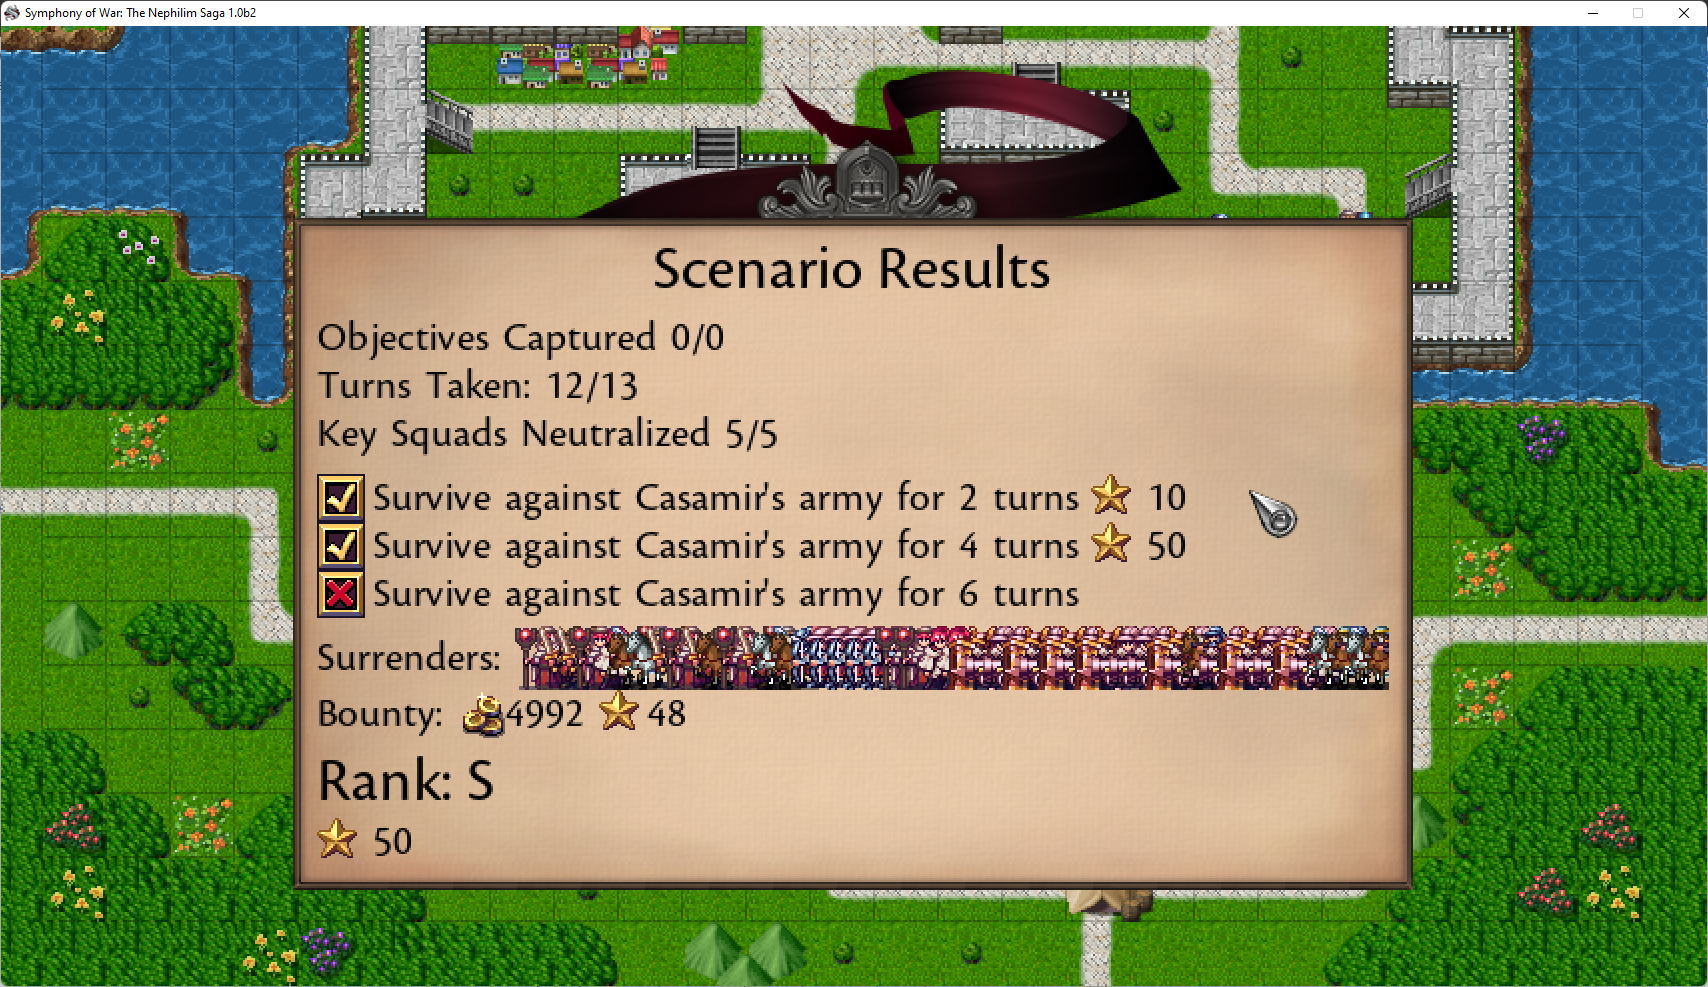 Symphony of War: The Nephilim Saga How to eliminate all enemy squads in chapter 12 - Achievement Guide - PHASE 2 : CASAMIR'S ARMY - AA89B32